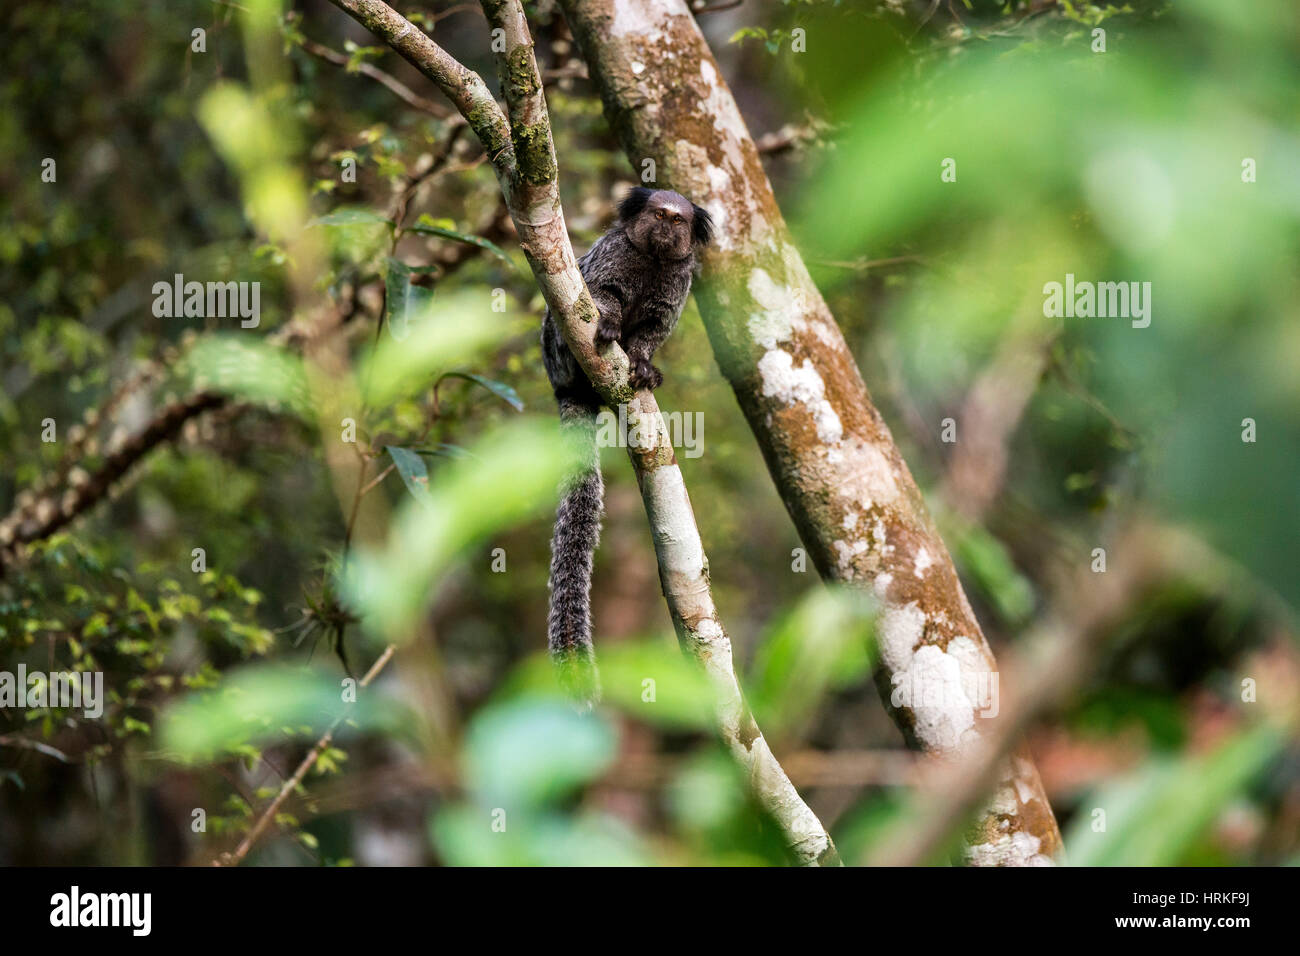 Hybrid marmoset. They are a mix of 2 species of marmoset of the genus Callithrix, New World monkeys of the family Callitrichidae. Photographed in Sant Stock Photo